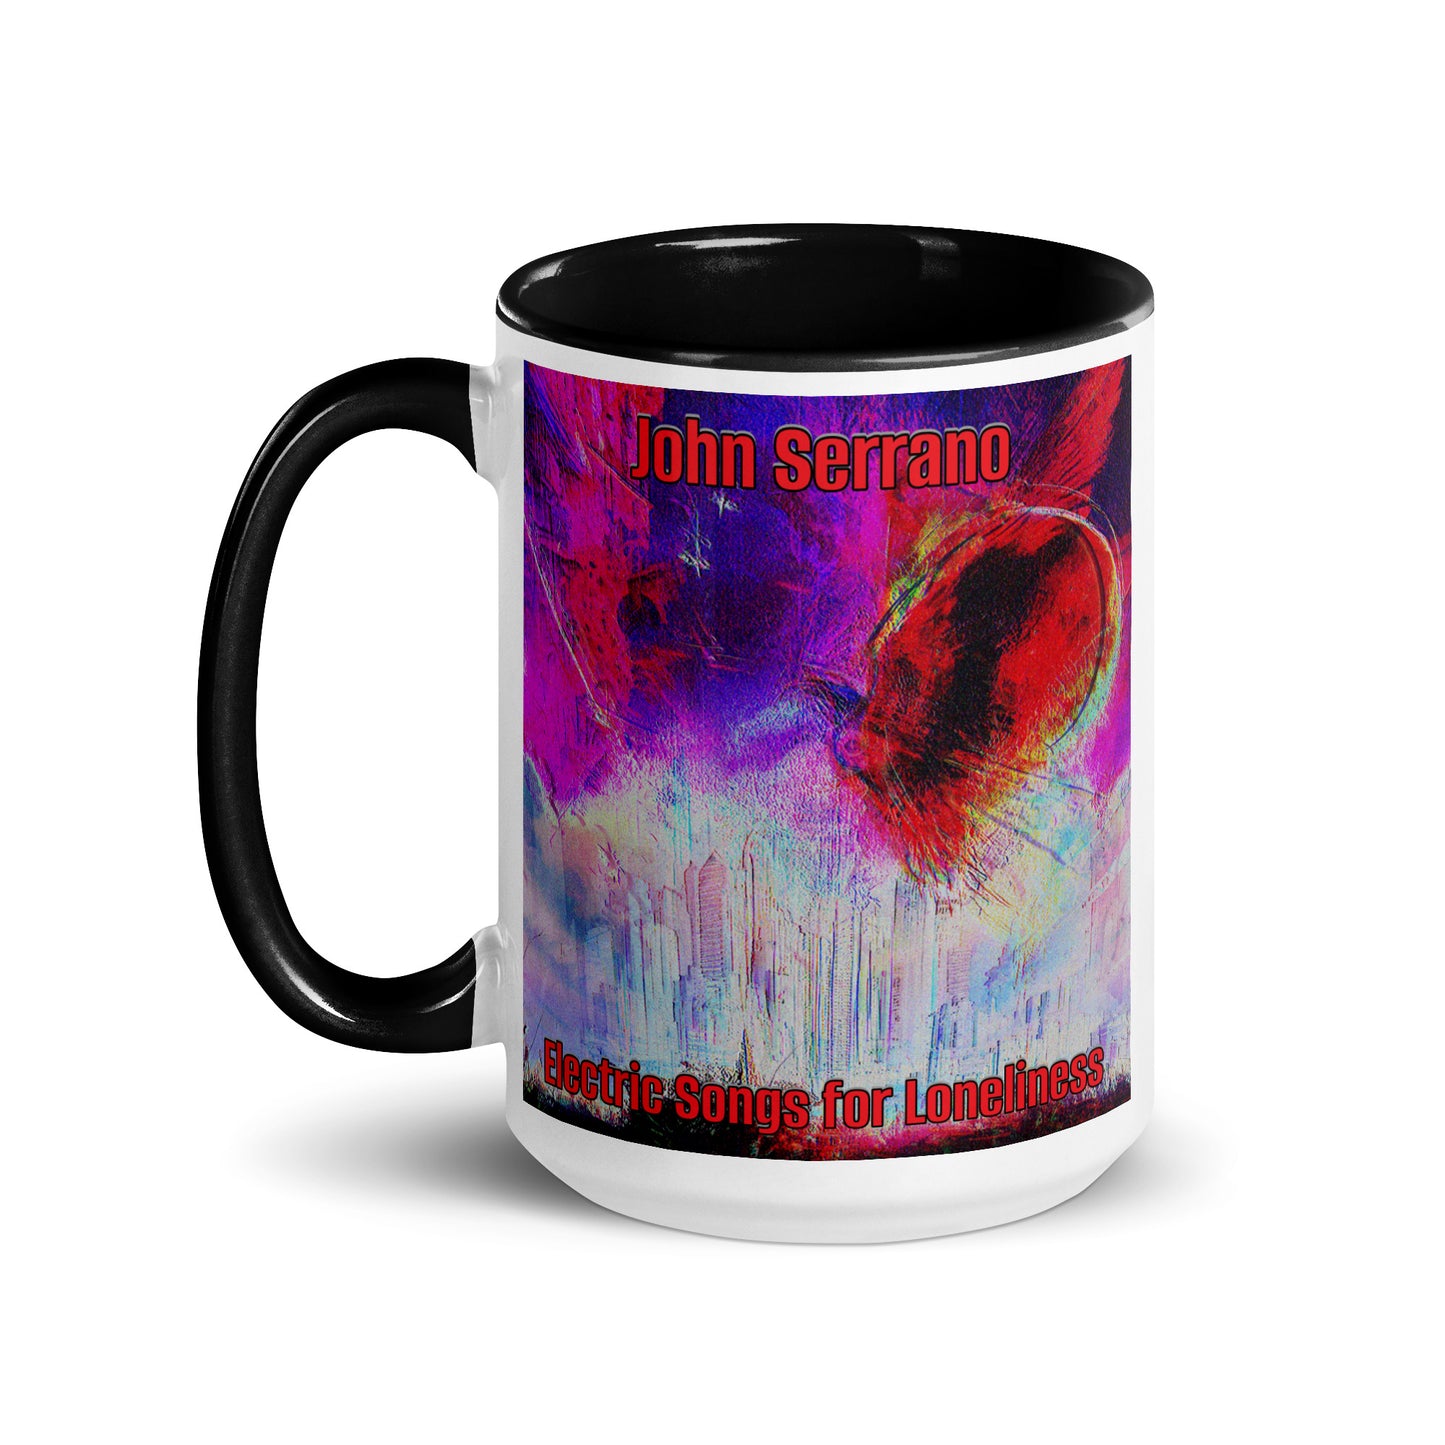 John Serrano - Electric Songs For Loneliness Mug With Color Inside